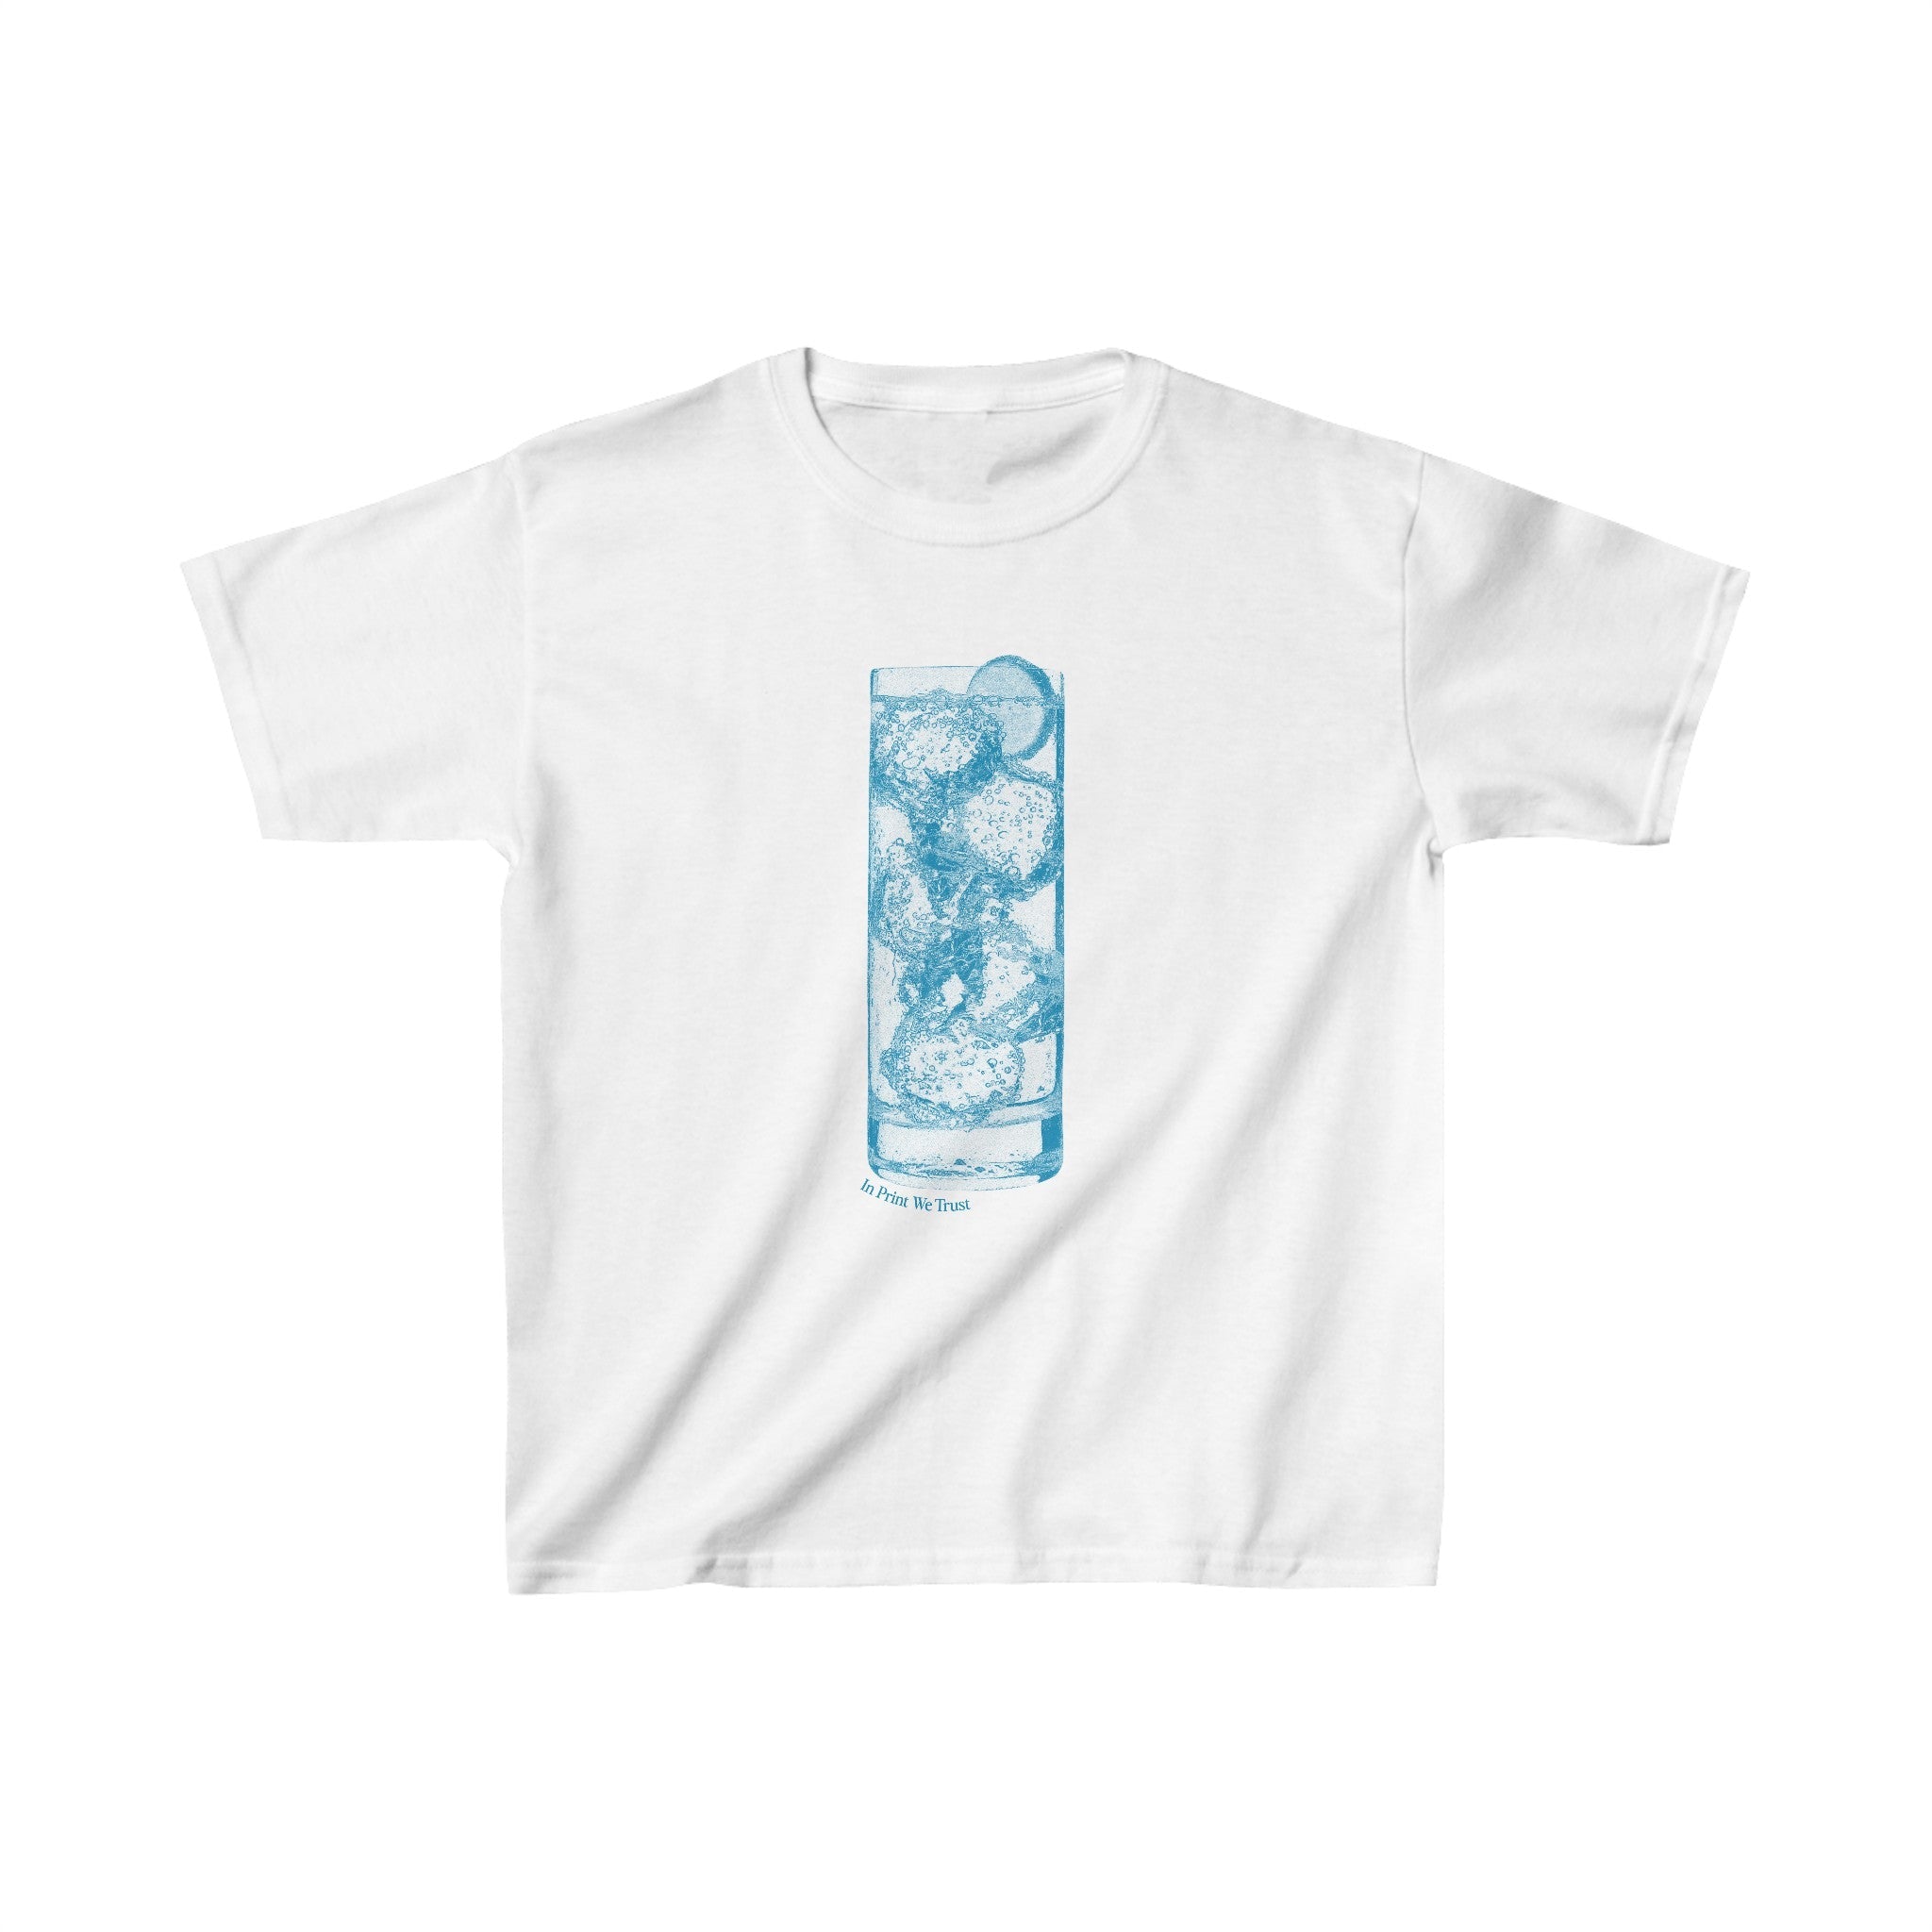 'Tall Glass of Water' baby tee - In Print We Trust